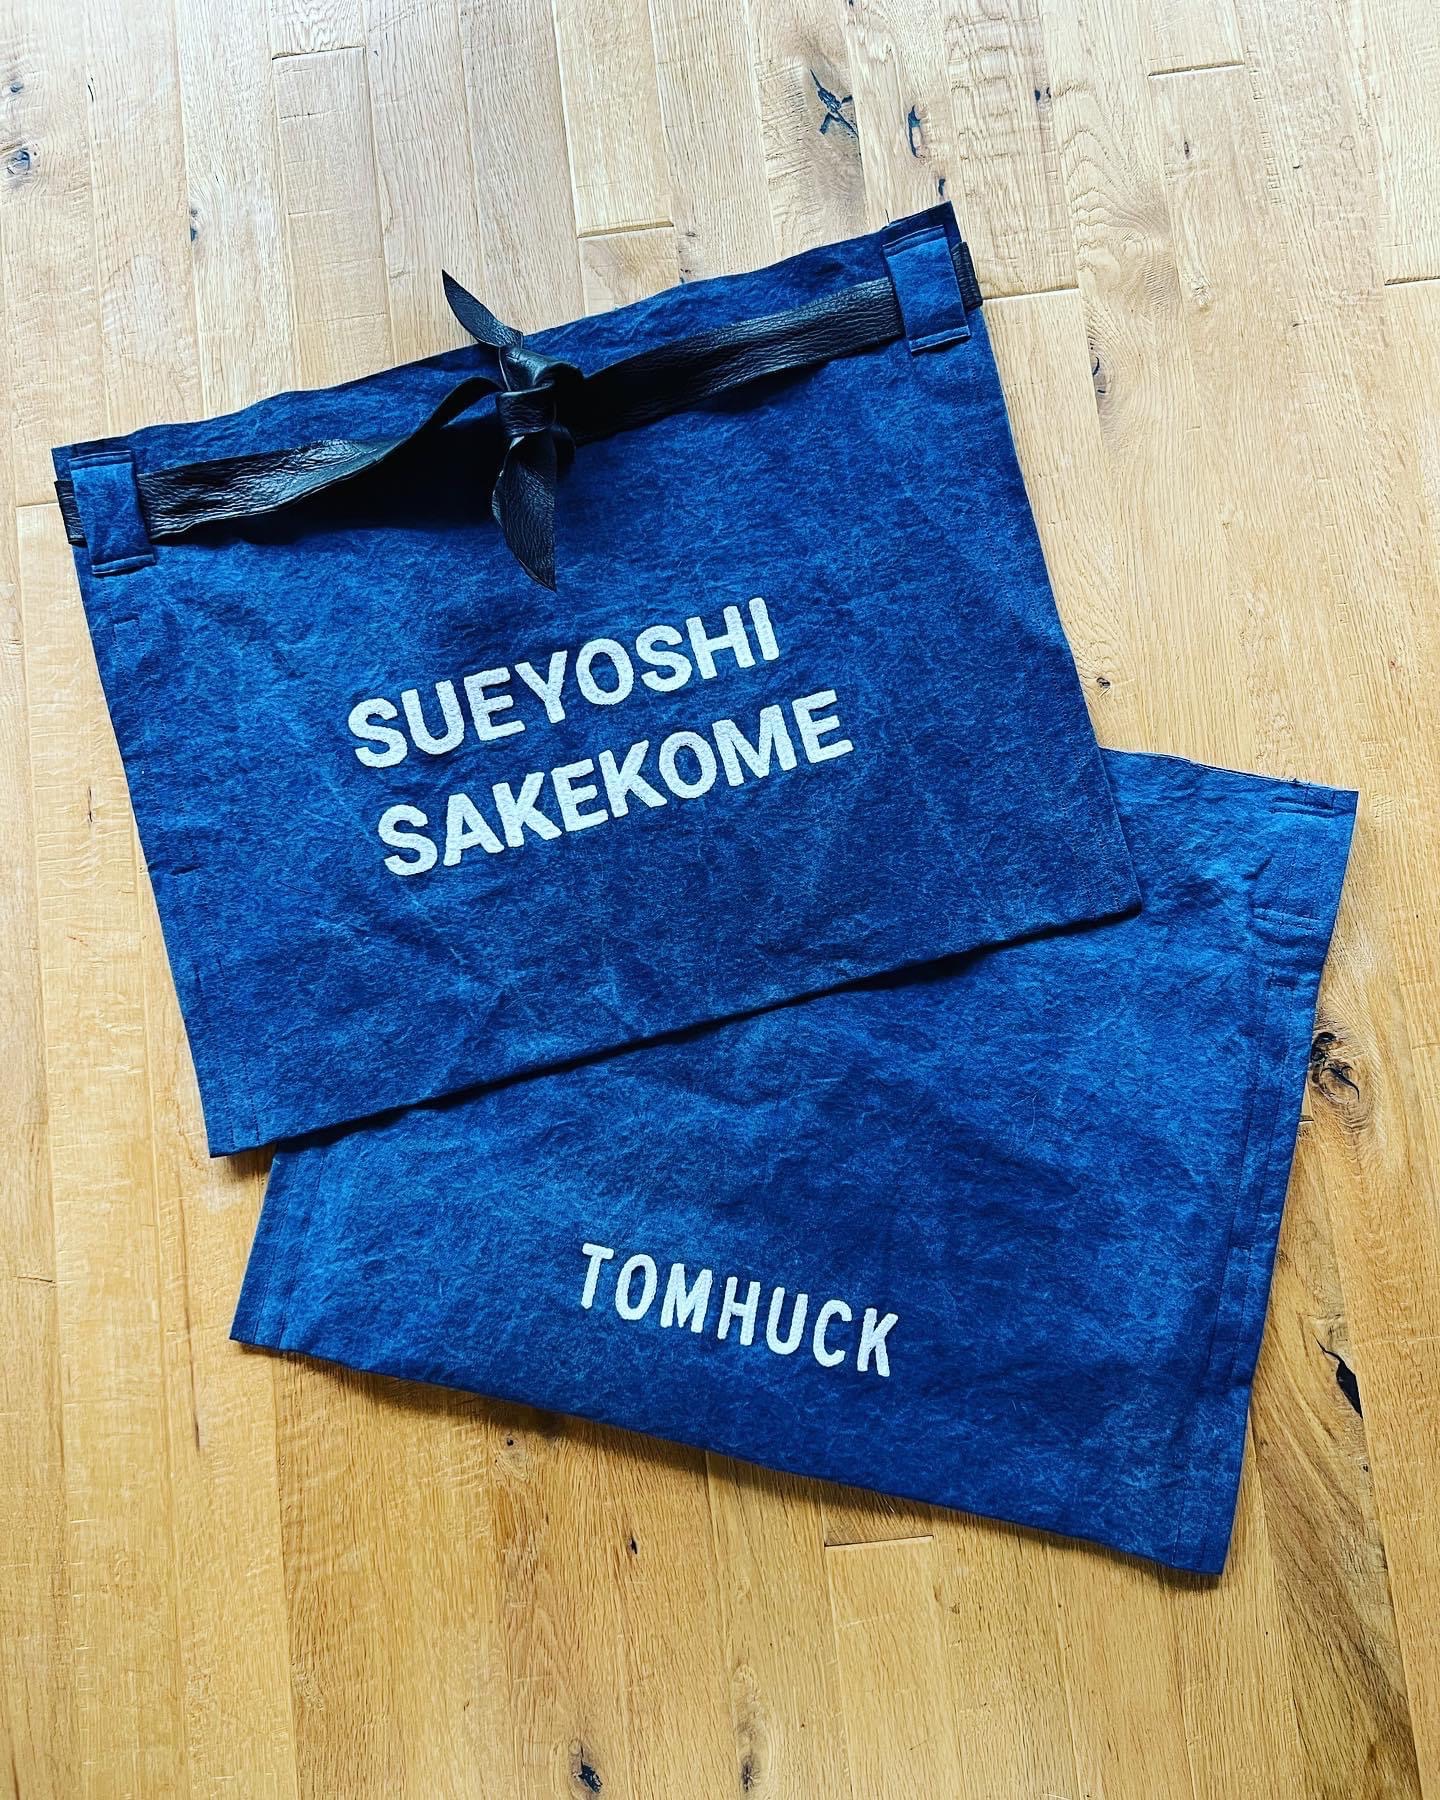 TOMHUCK　すえよし酒米店